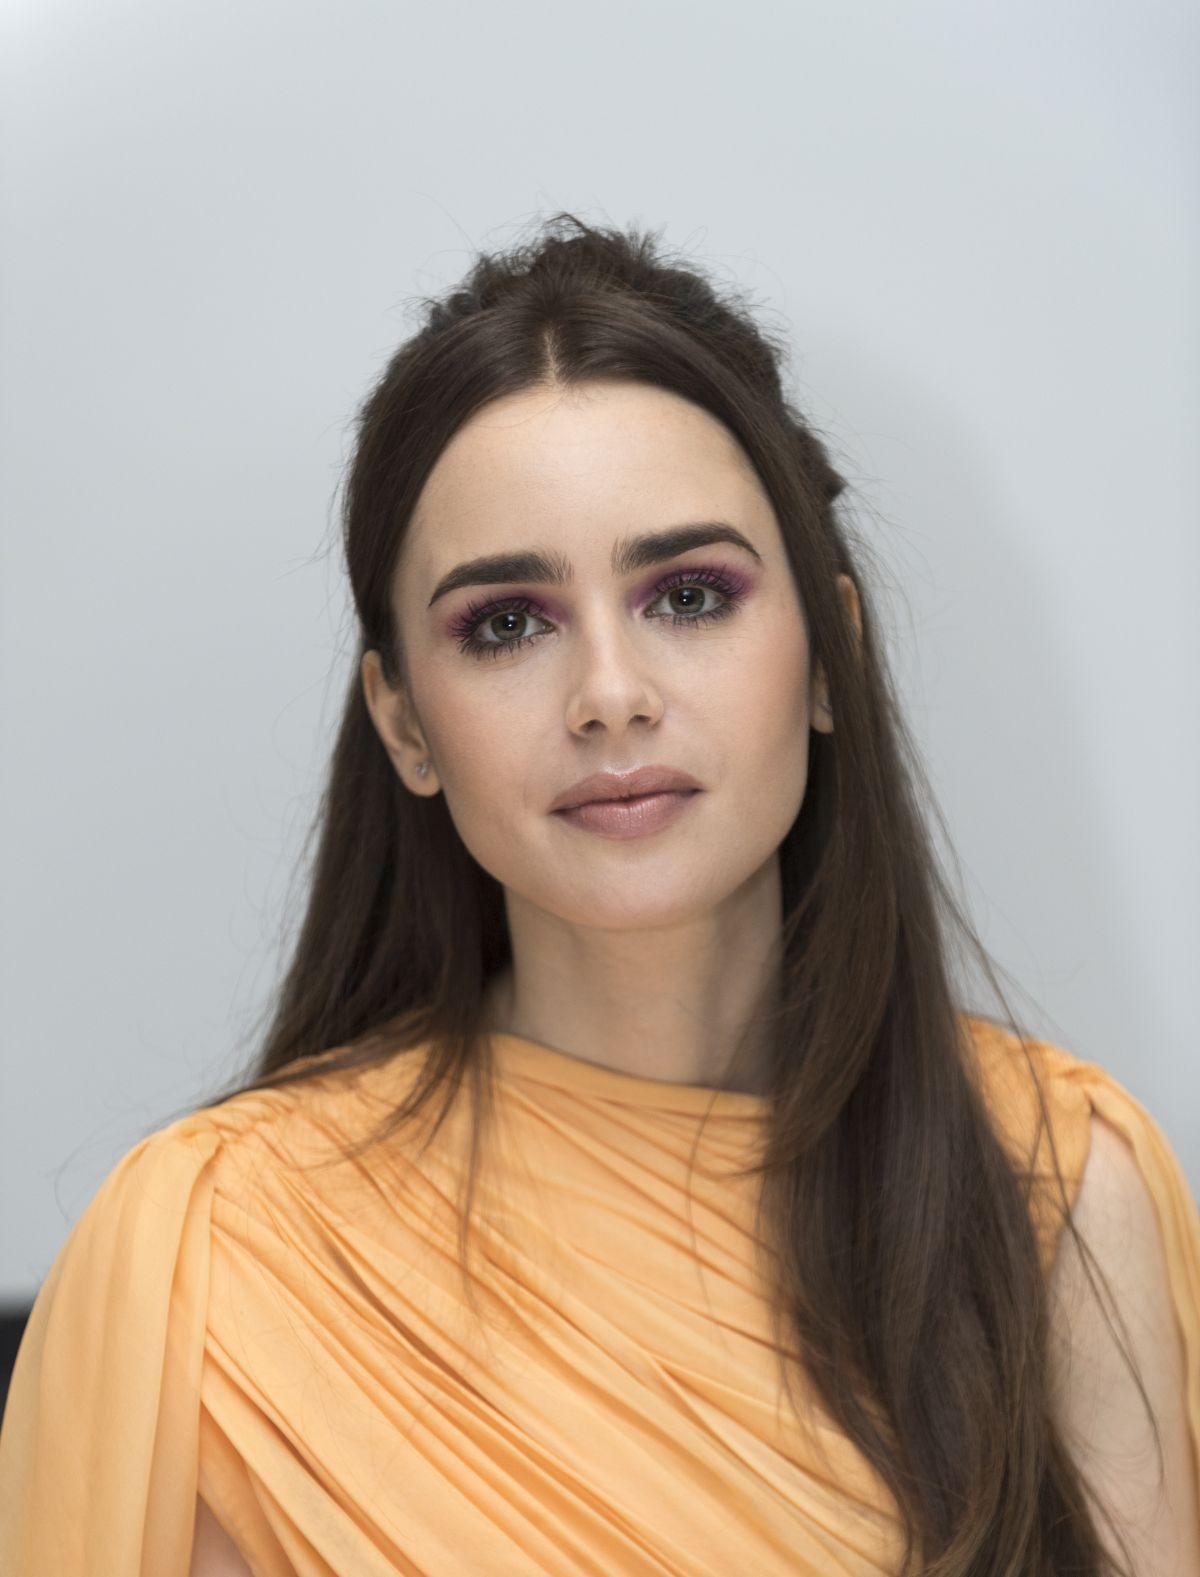 Lily Collins Les Miserables Portraits At The Four Seasons Hotel